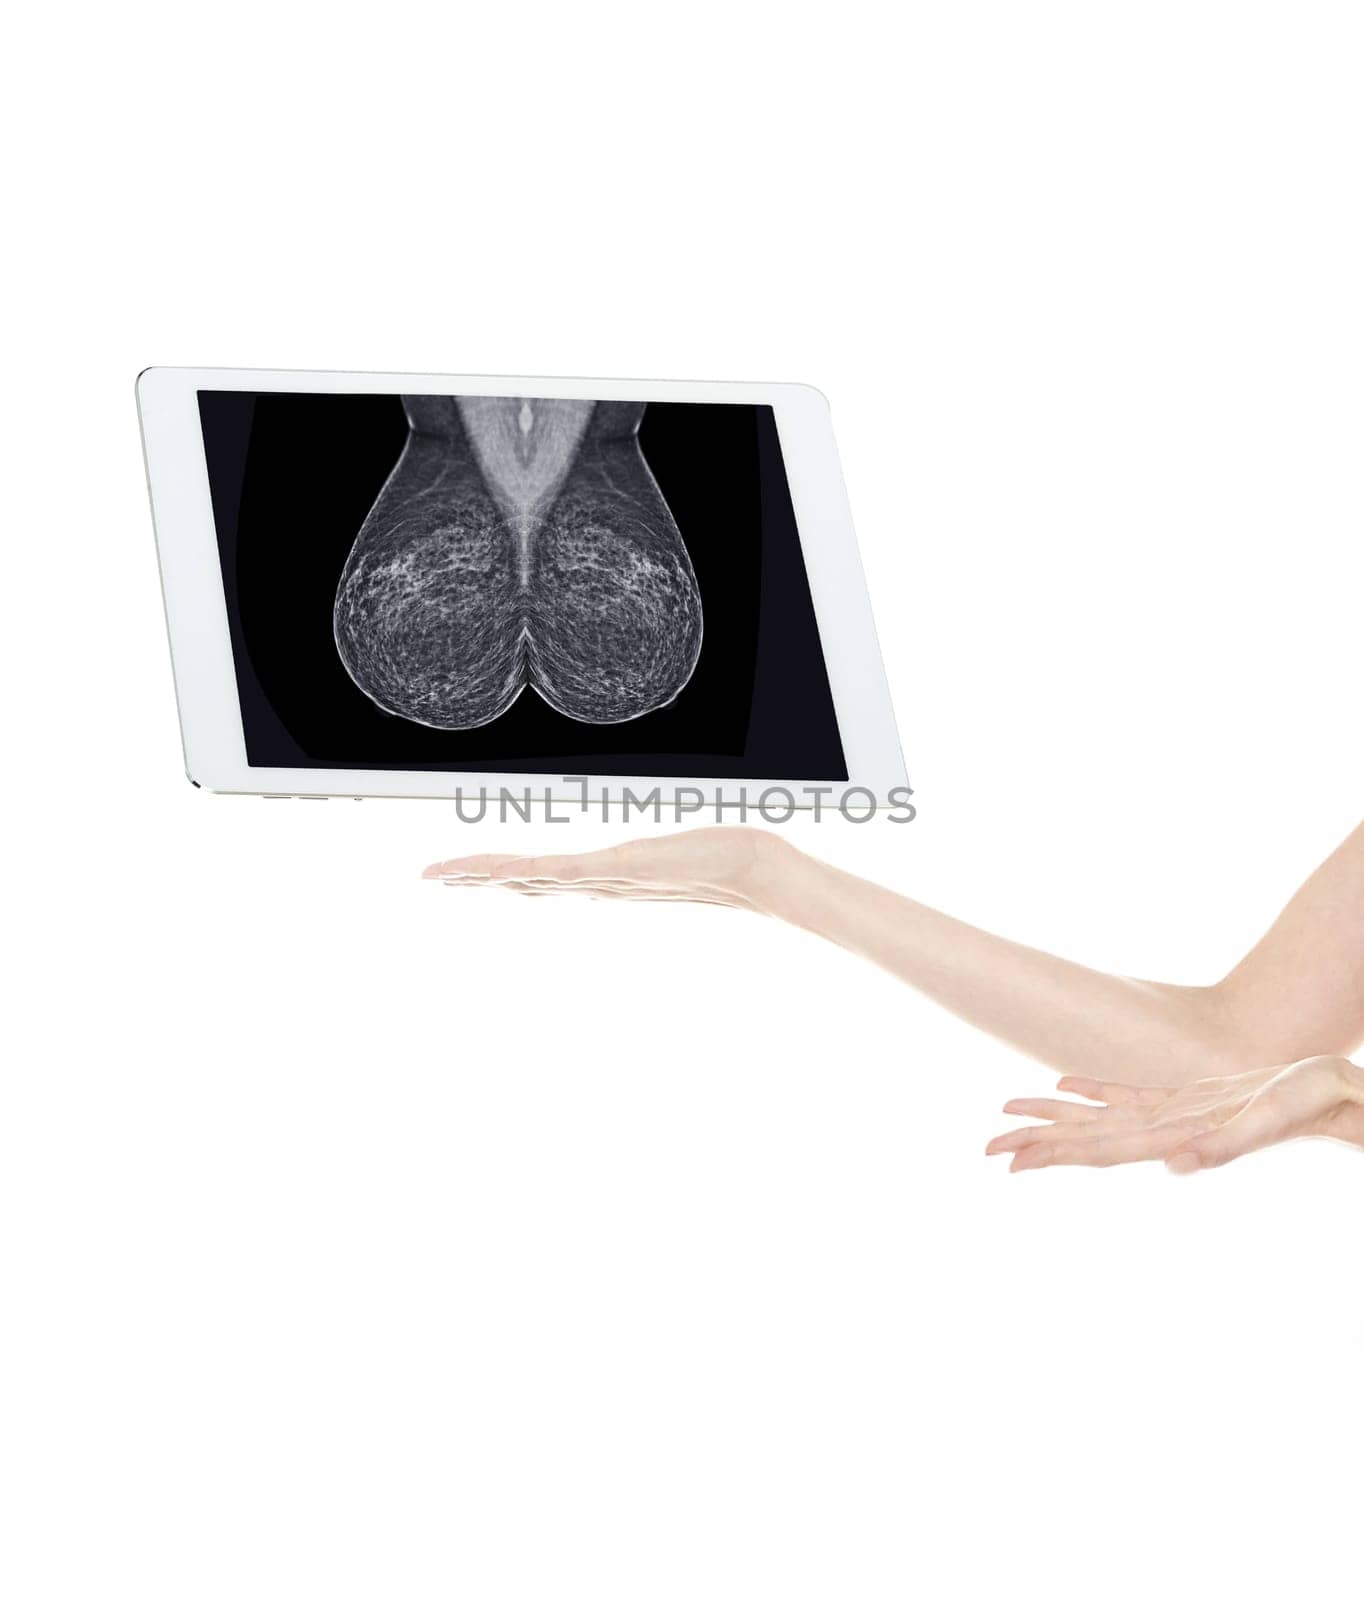 The doctor using digital tablet against X-ray Digital Mammogram isolated on white background. breast cancer awareness against woman for fight against breast cancer .